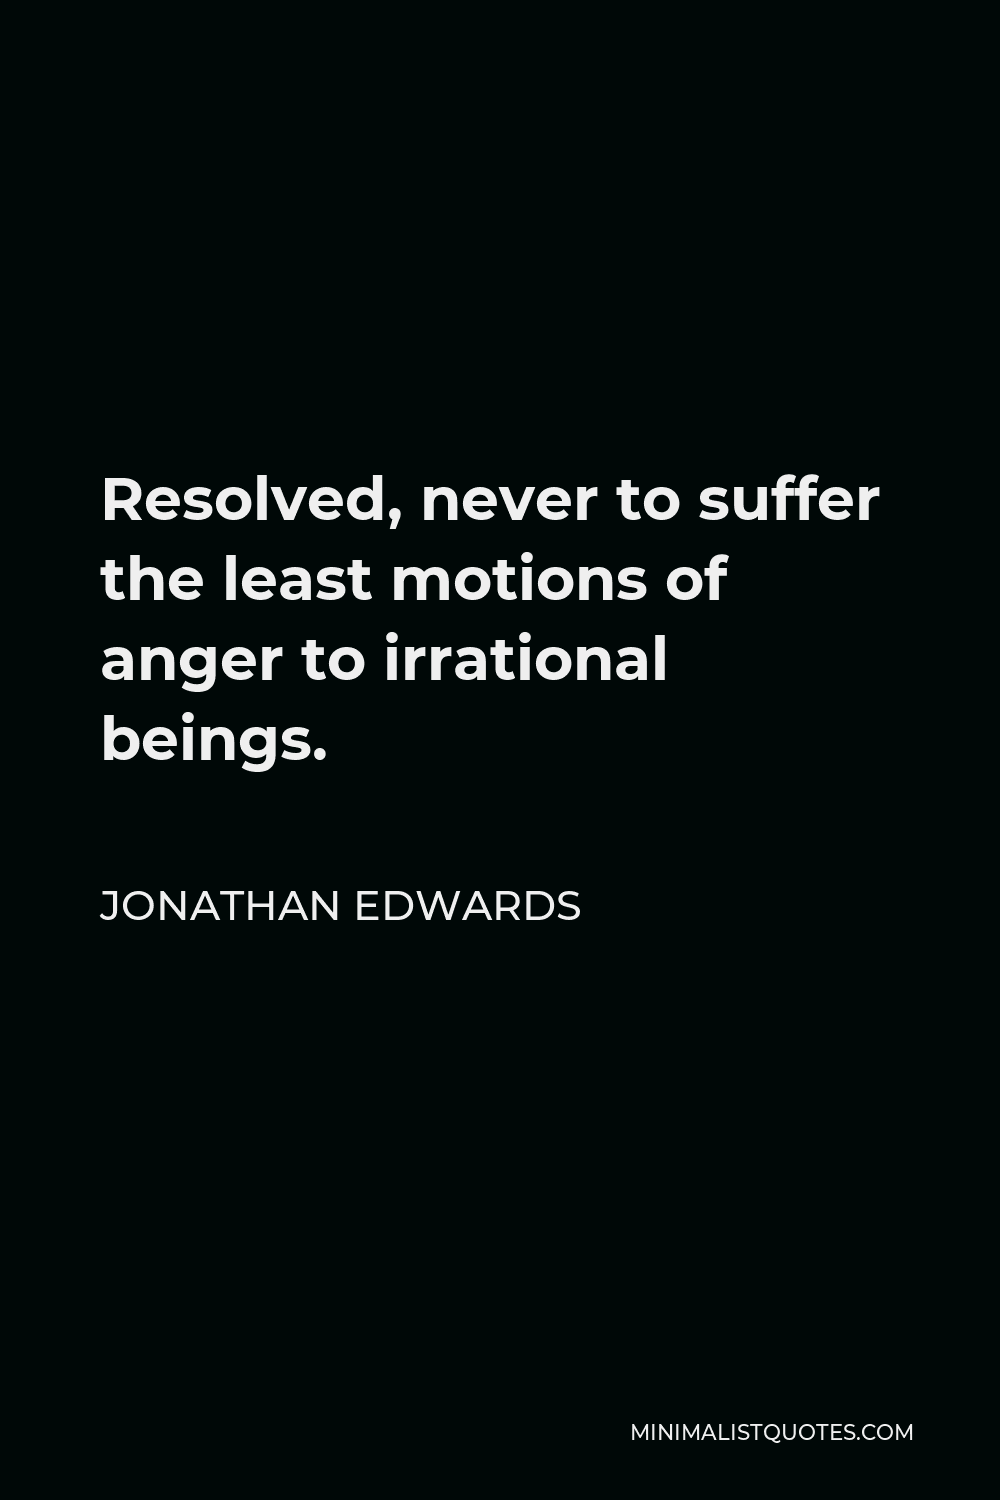 Jonathan Edwards Quote - Resolved, never to suffer the least motions of anger to irrational beings.